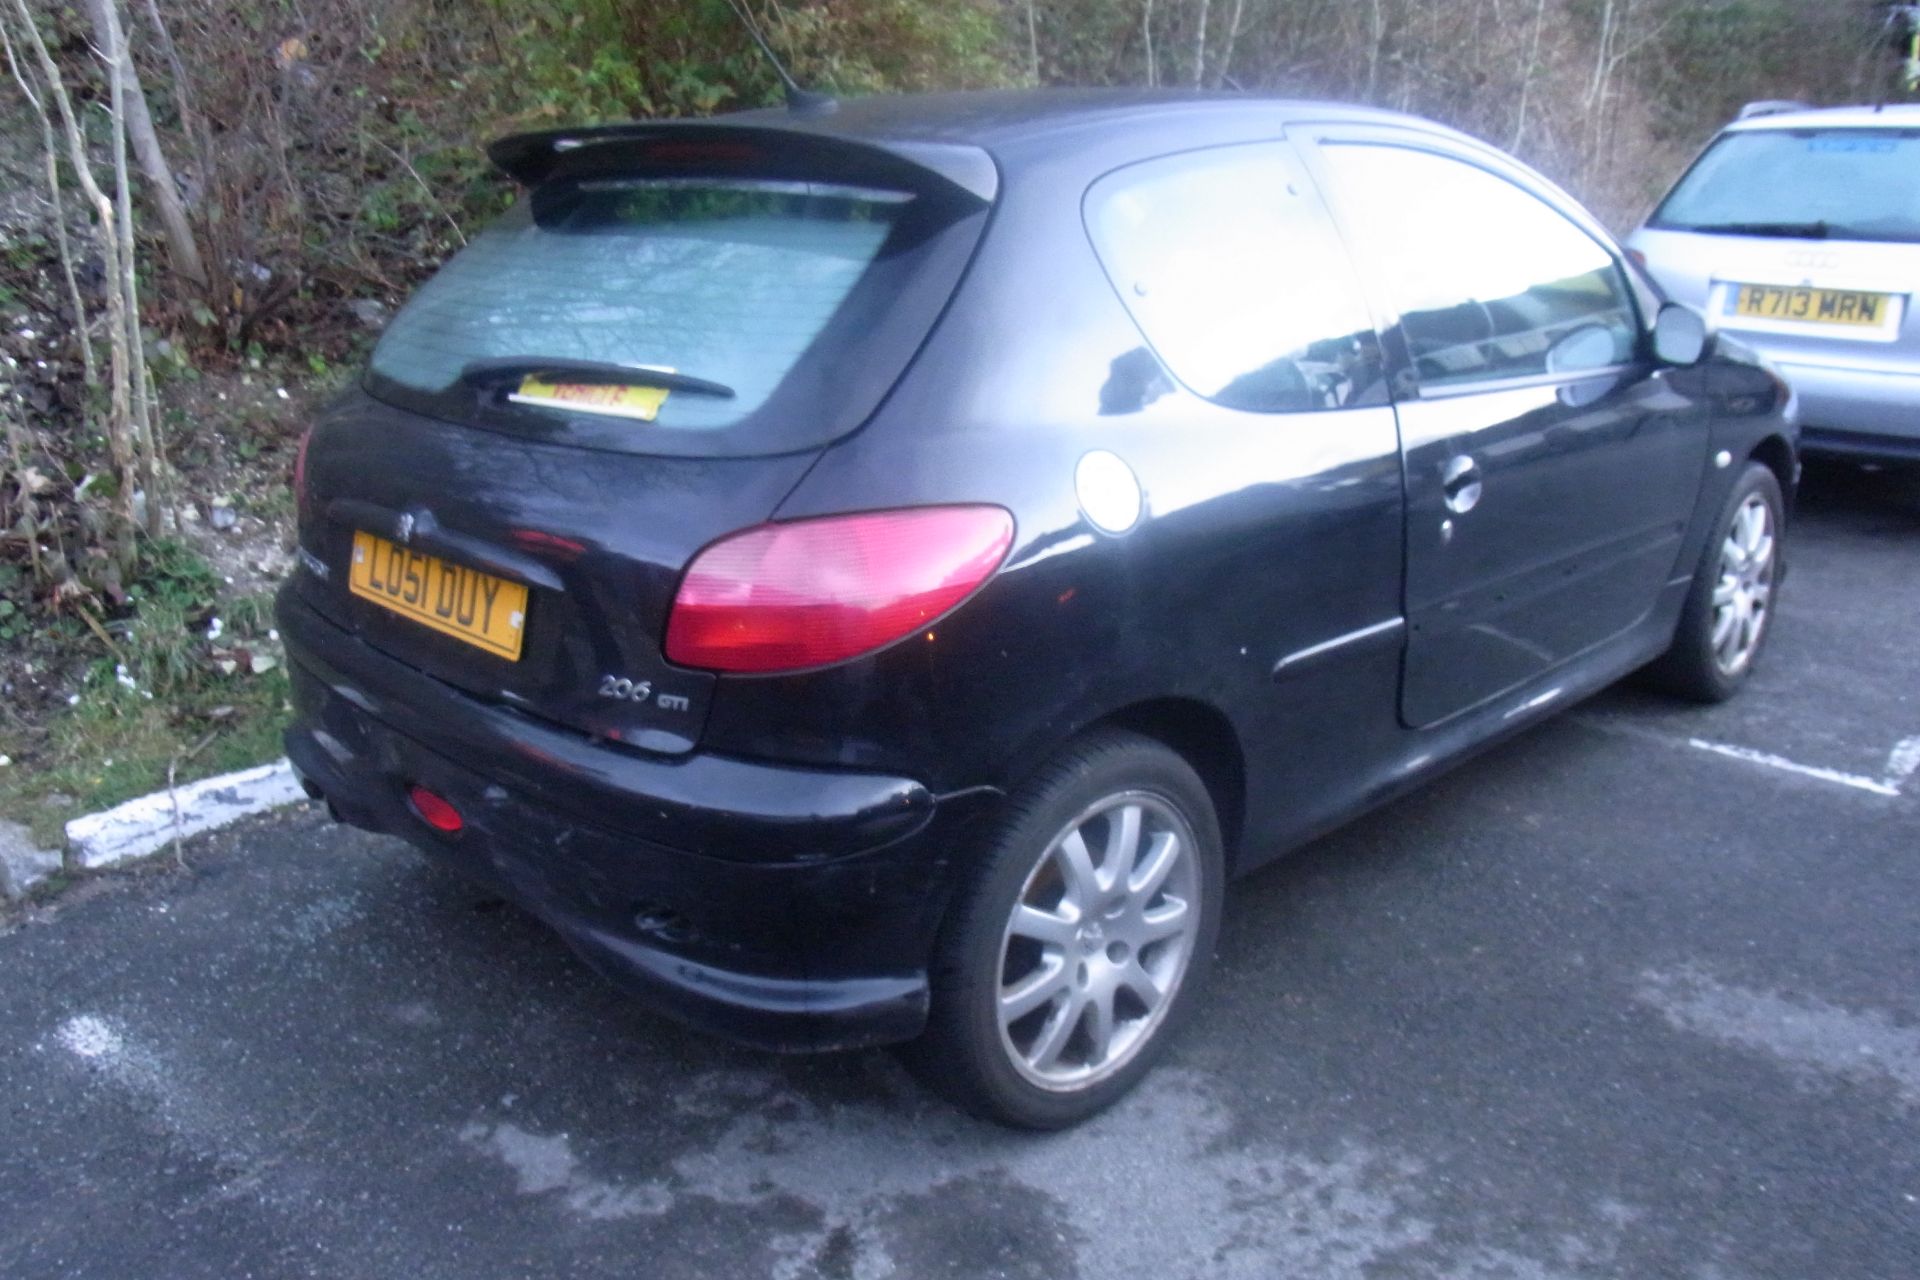 LO51 DUY Peugeot 206 GTI - No V5 - No Key
LICENCED ATF BIDDERS ONLY - Image 2 of 3